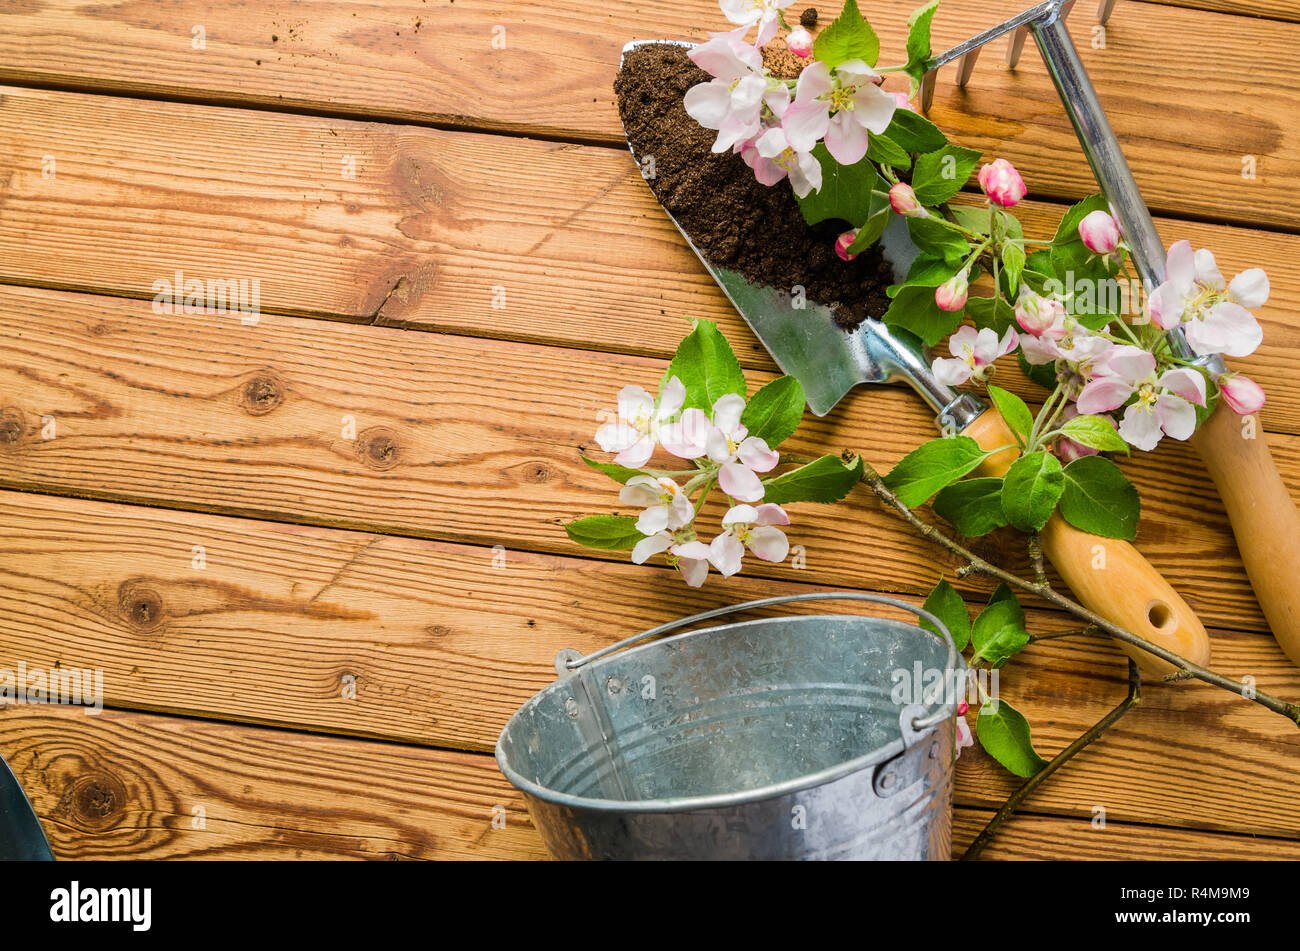 Branch of blossoming apple and garden tools on a wooden surface, close-up. Stock Photo